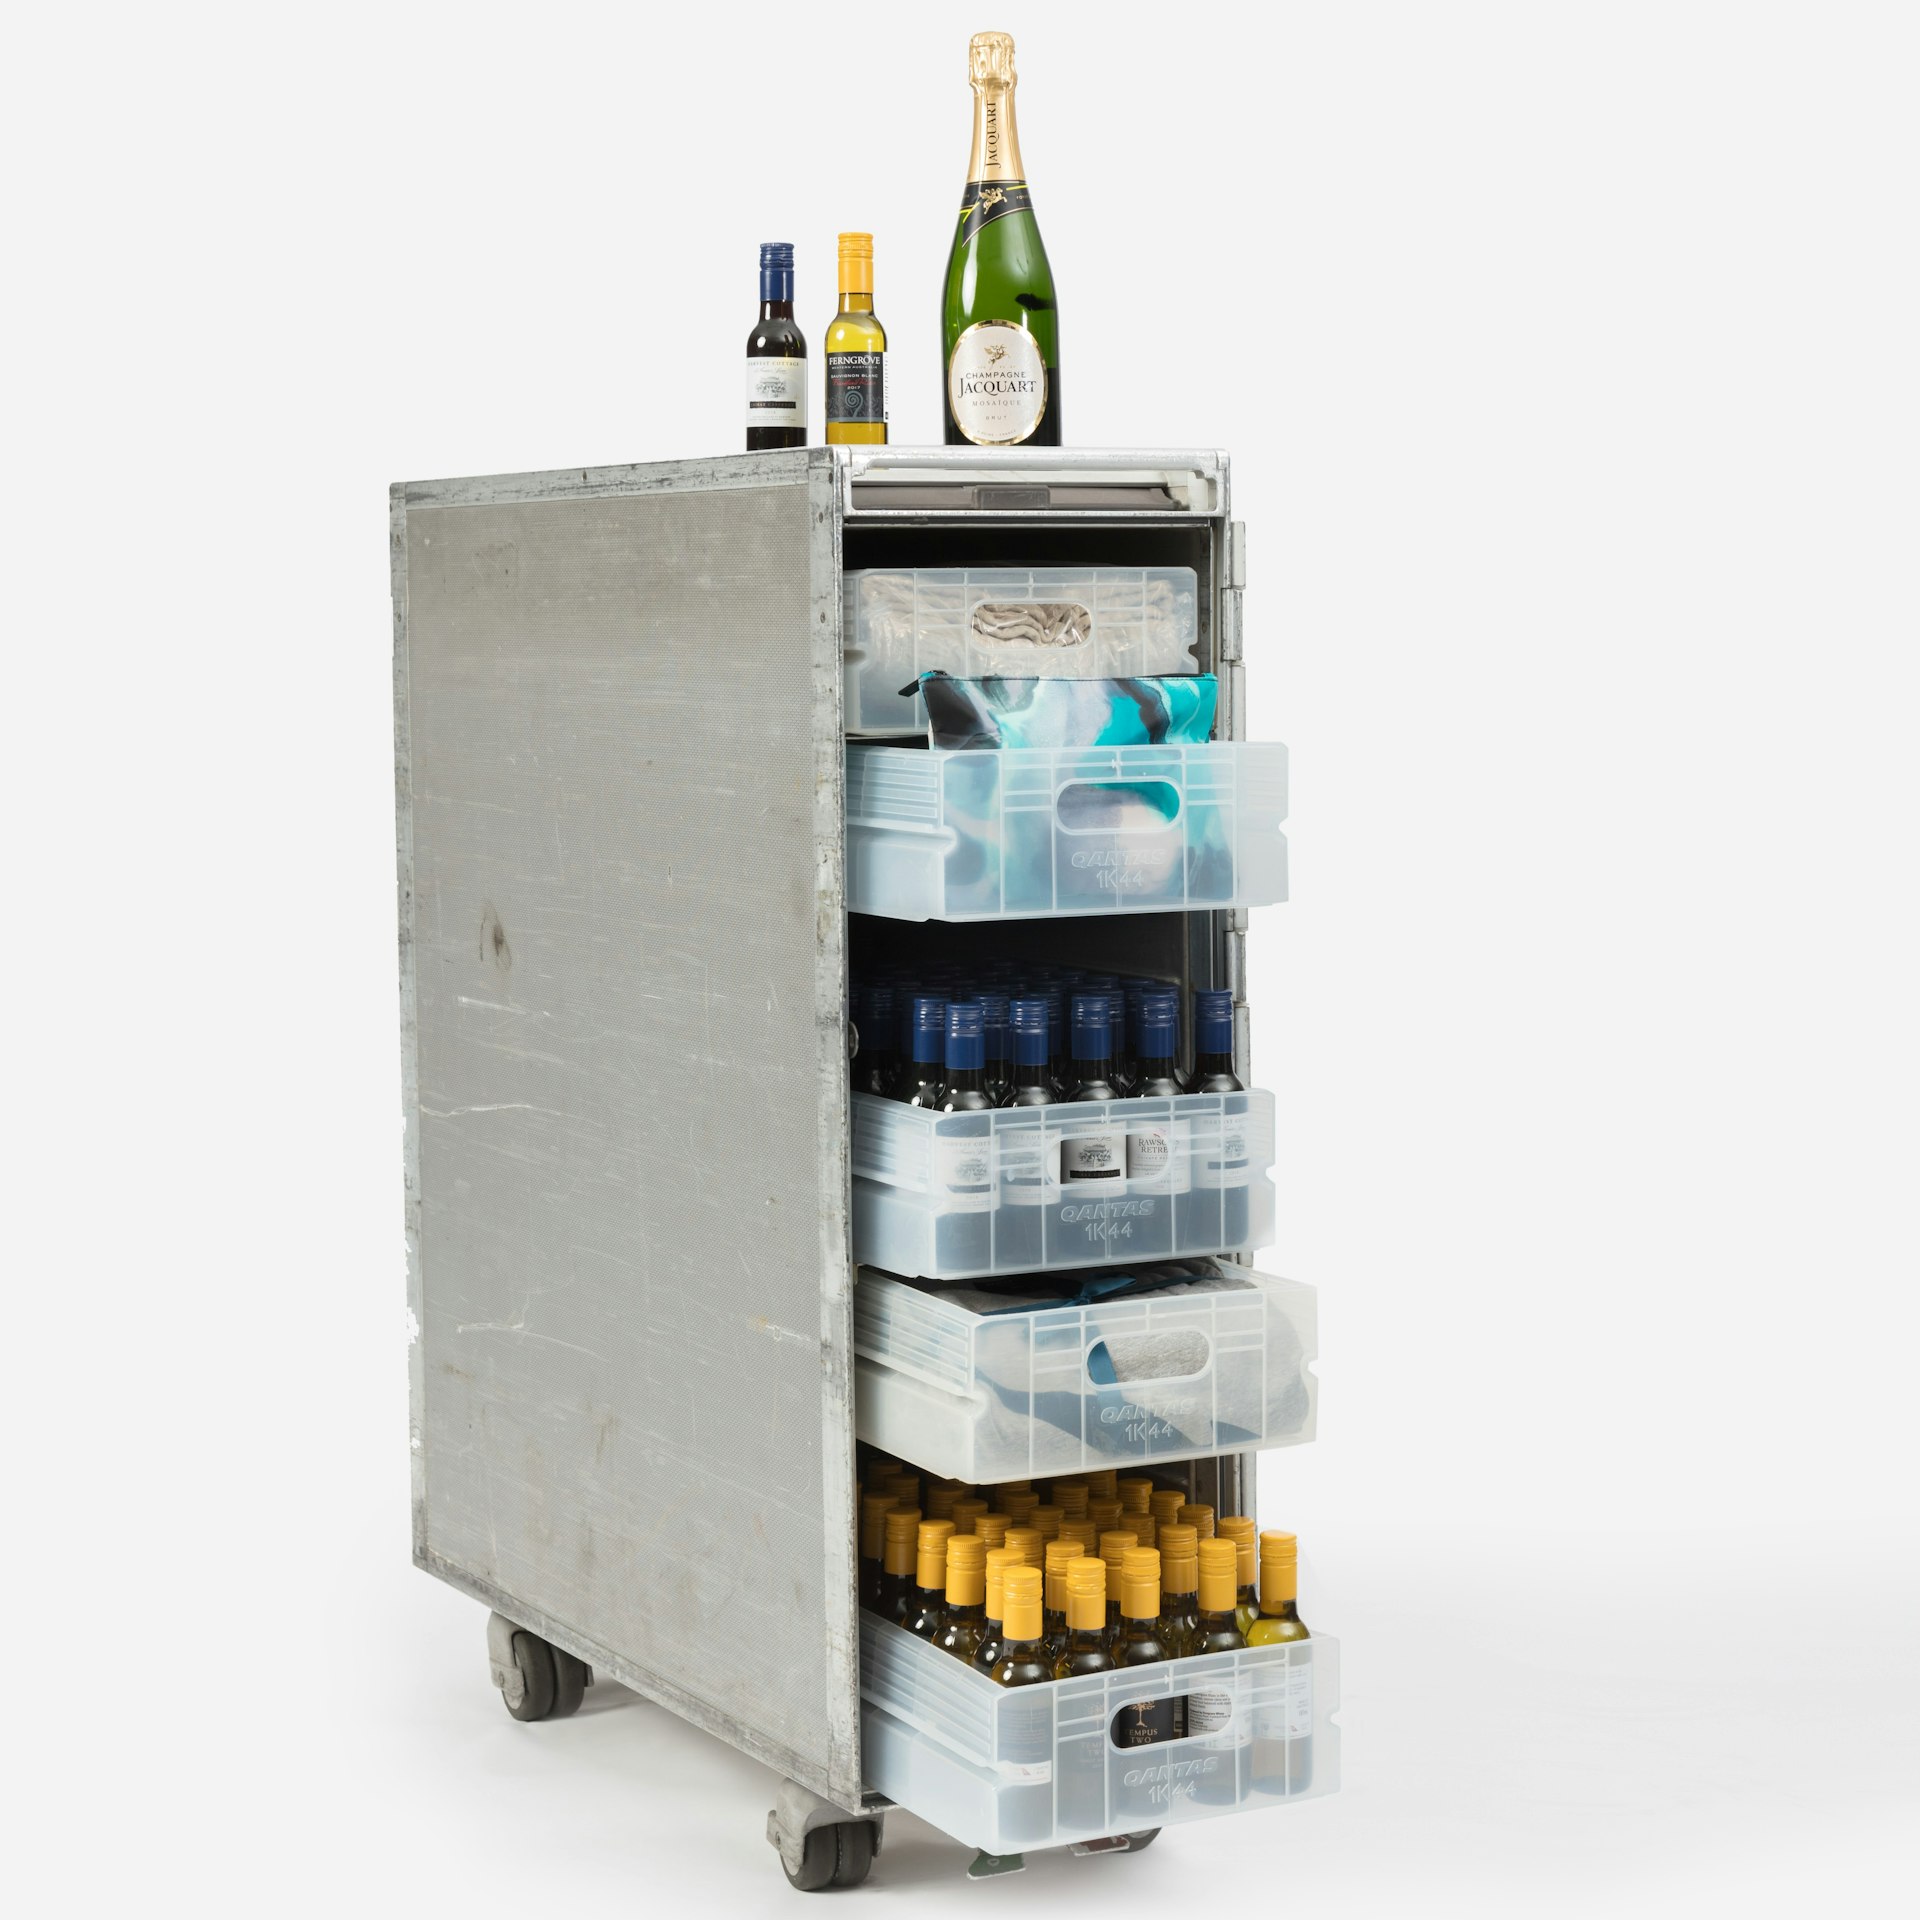 A Qantas bar cart filled with food and drink